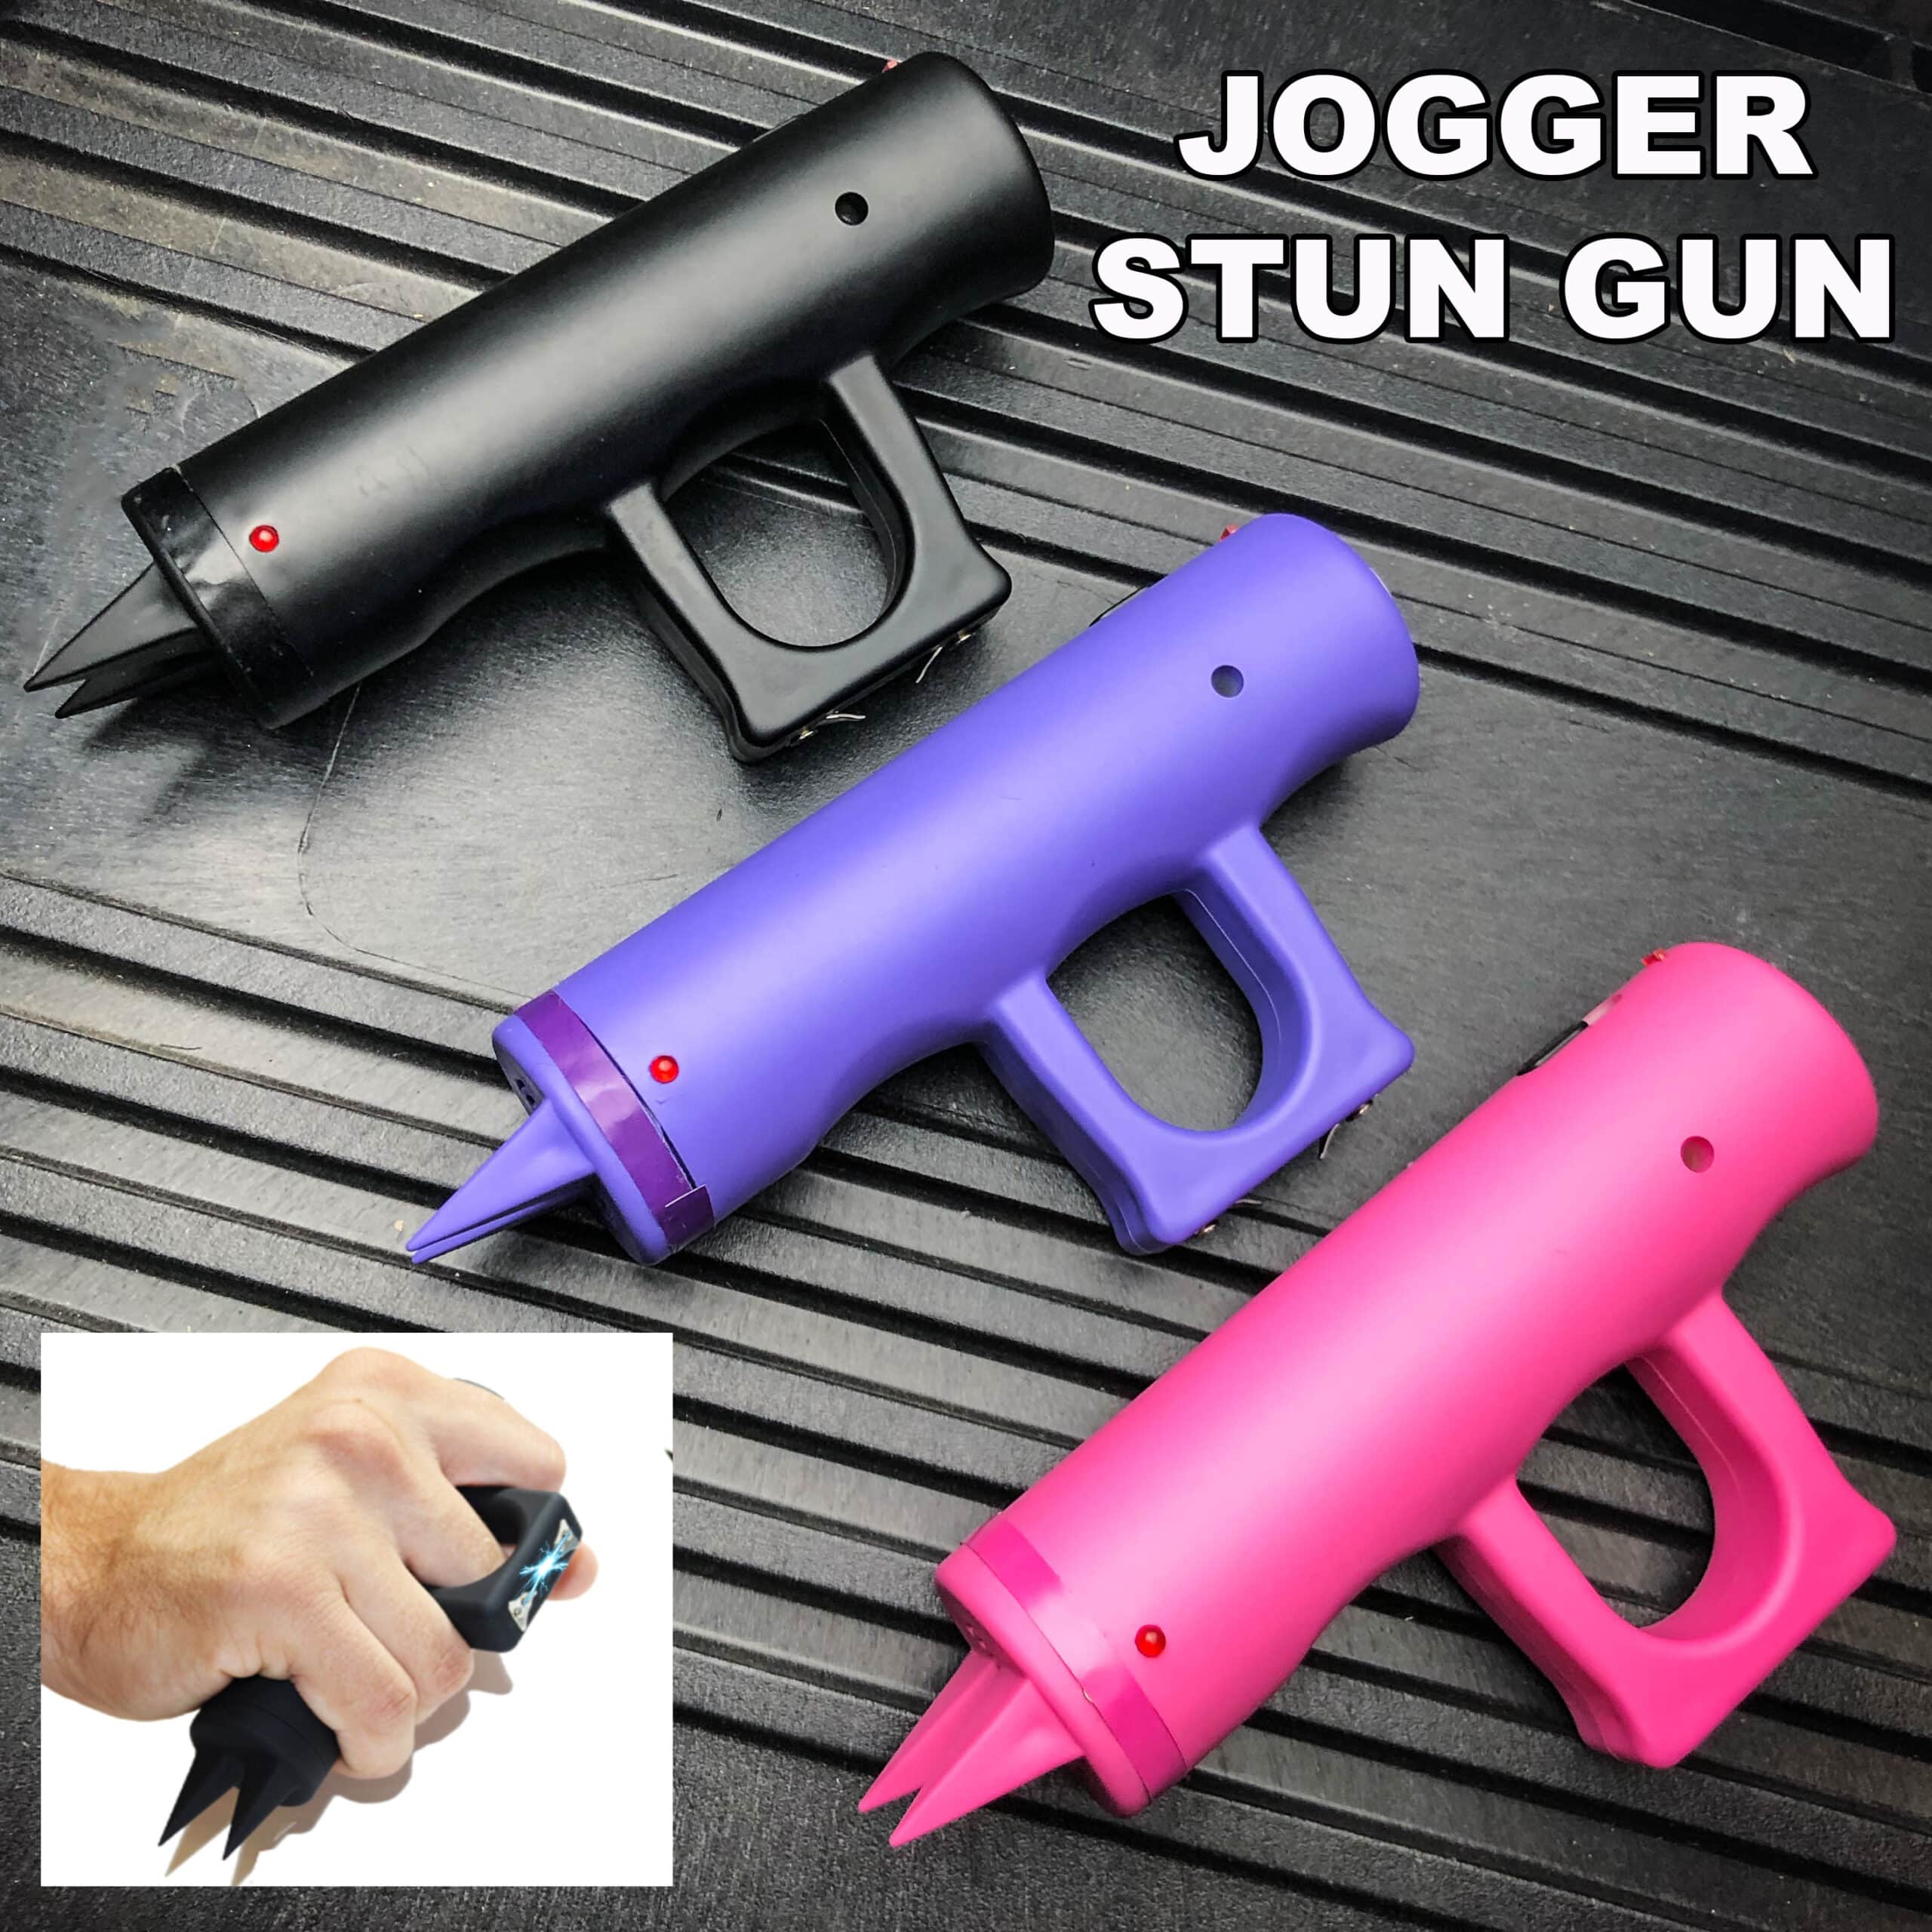 SPIKED JOGGER STUN GUN WITH ALARM AND USB CHARGER